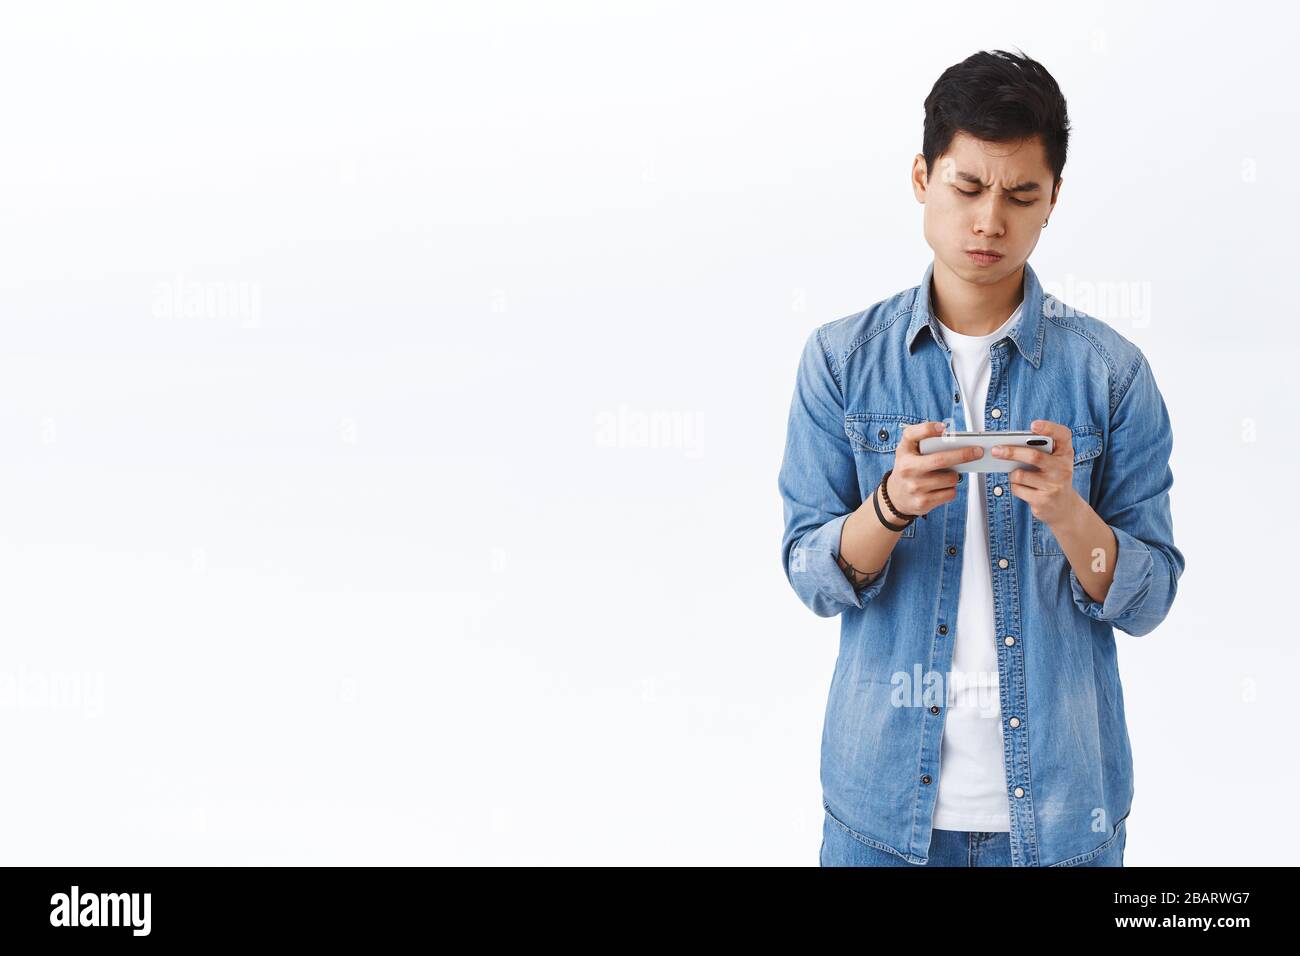 Technology, online lifestyle concept. Portrait of bothered and annoyed, young gloomy asian guy cant win in game, look upset losing level, holding Stock Photo